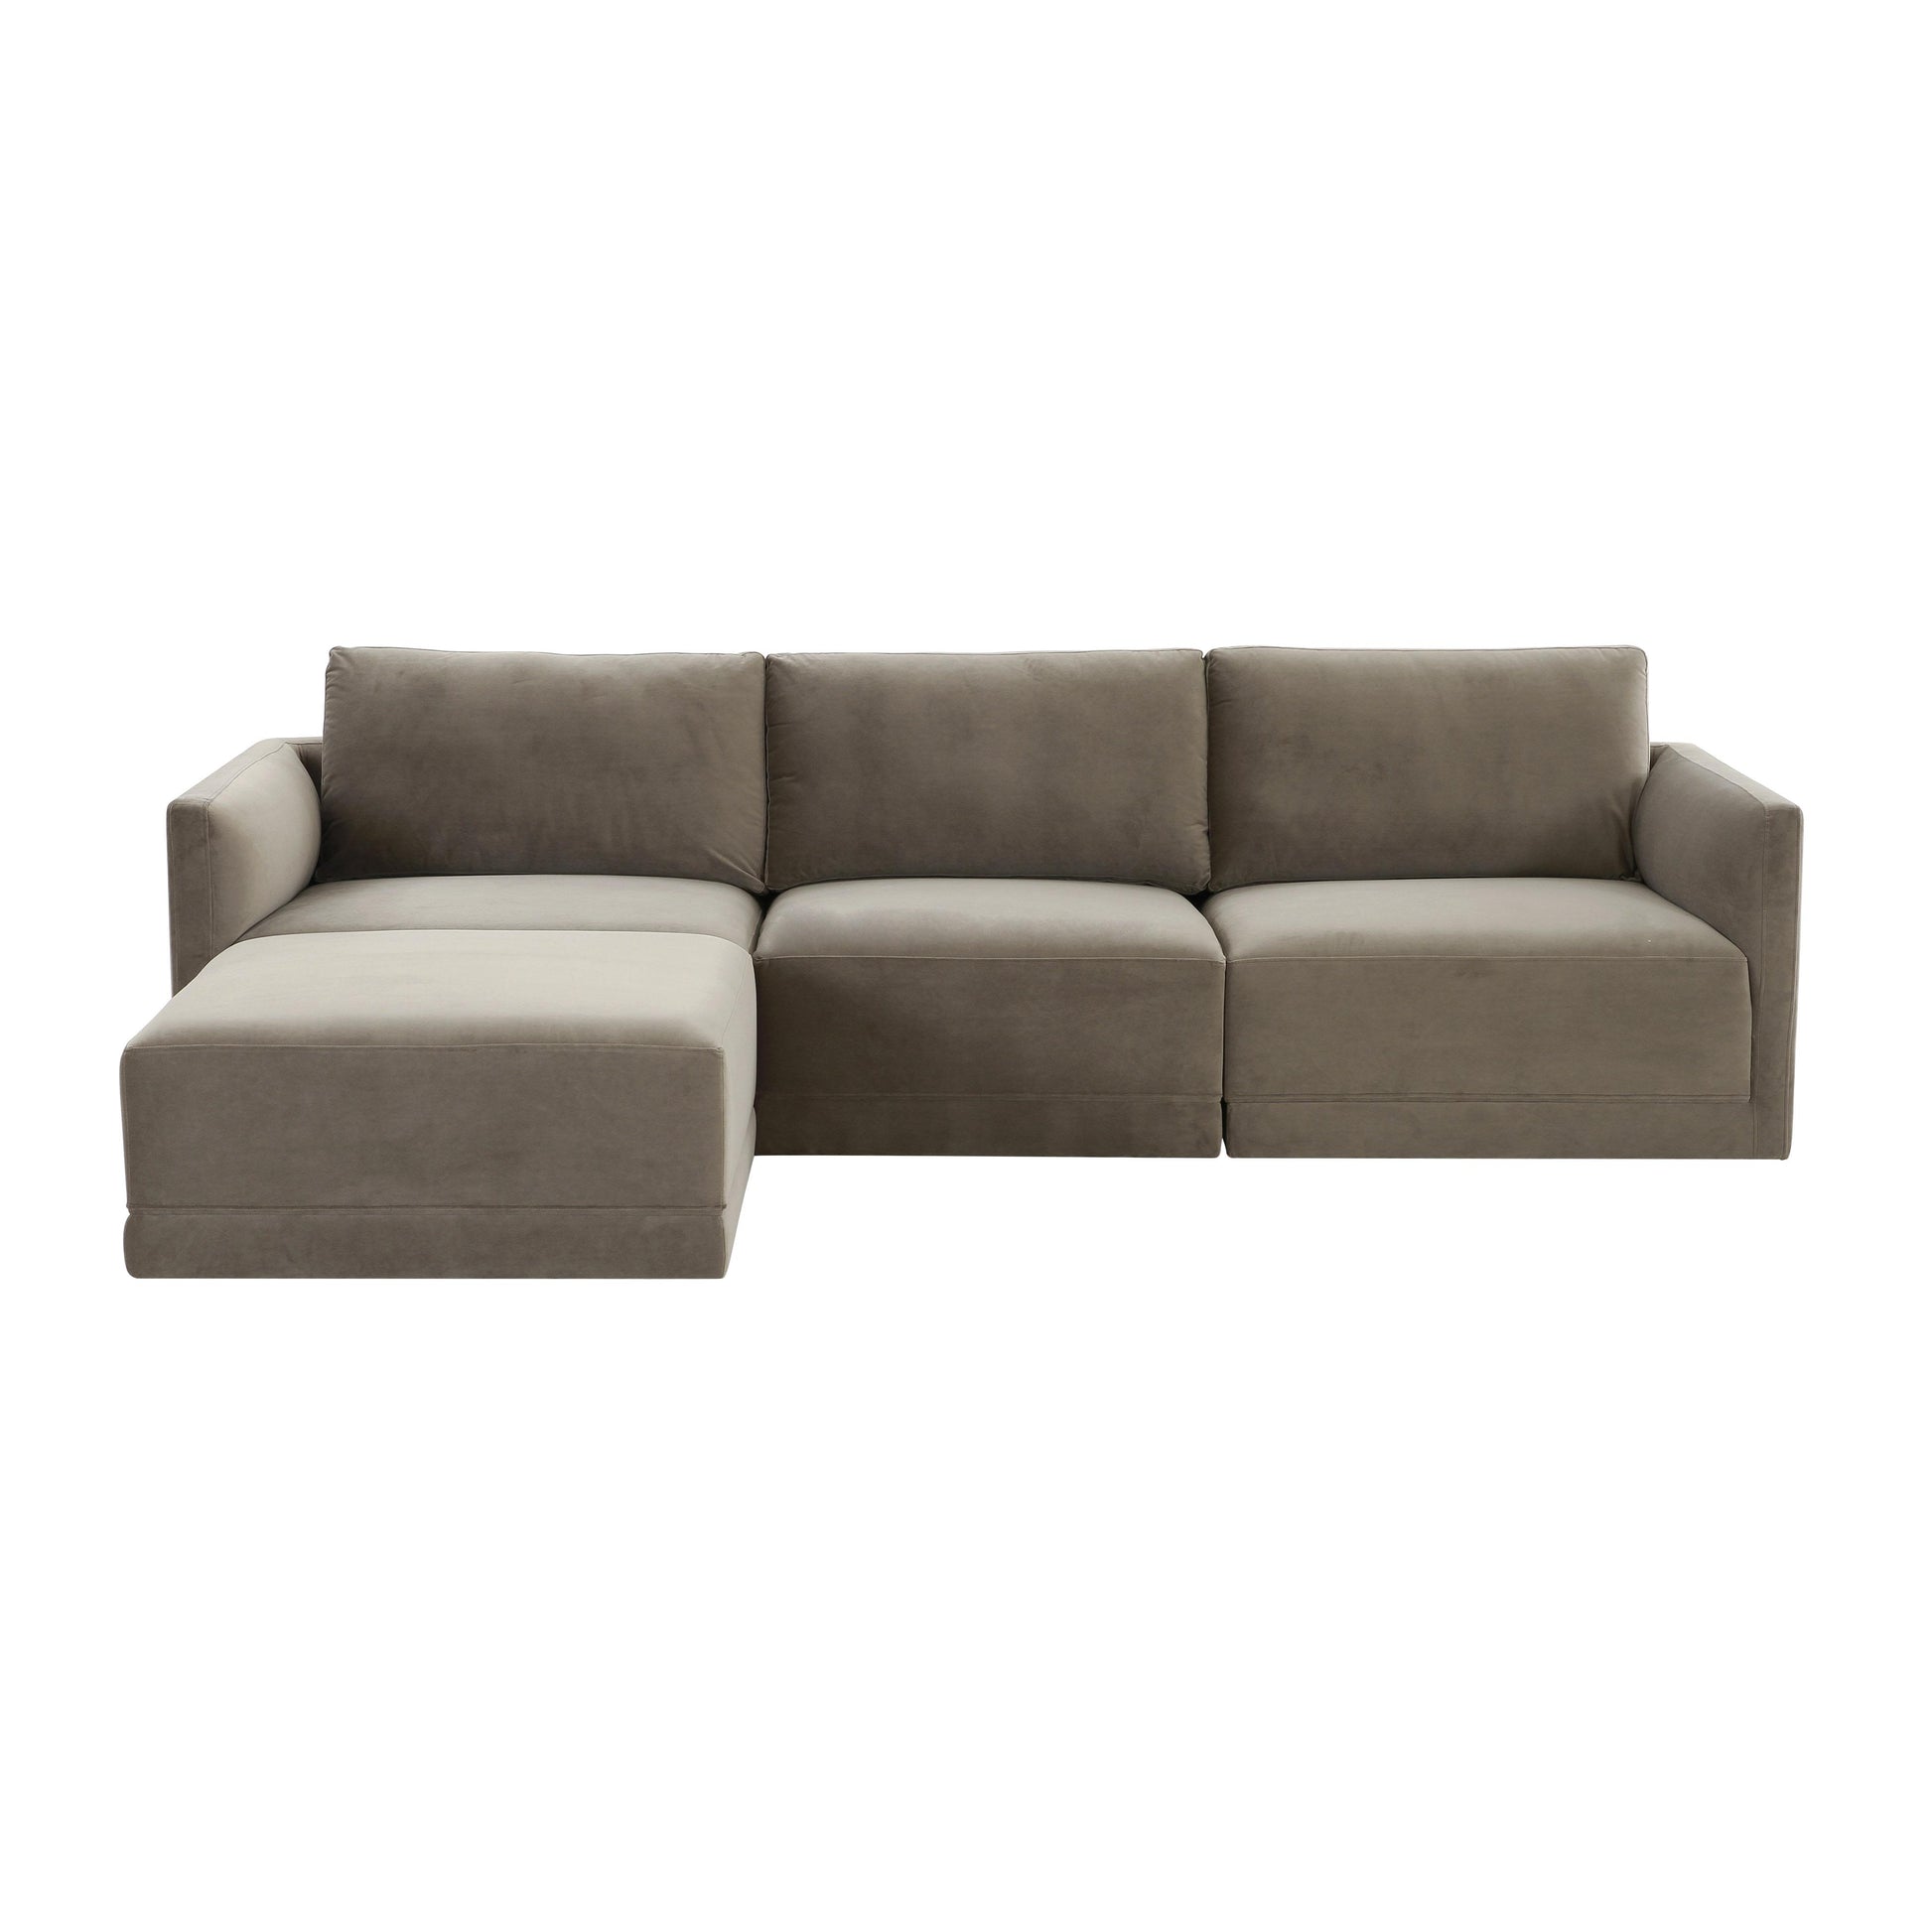 Tov Furniture Willow Taupe Modular Sectional